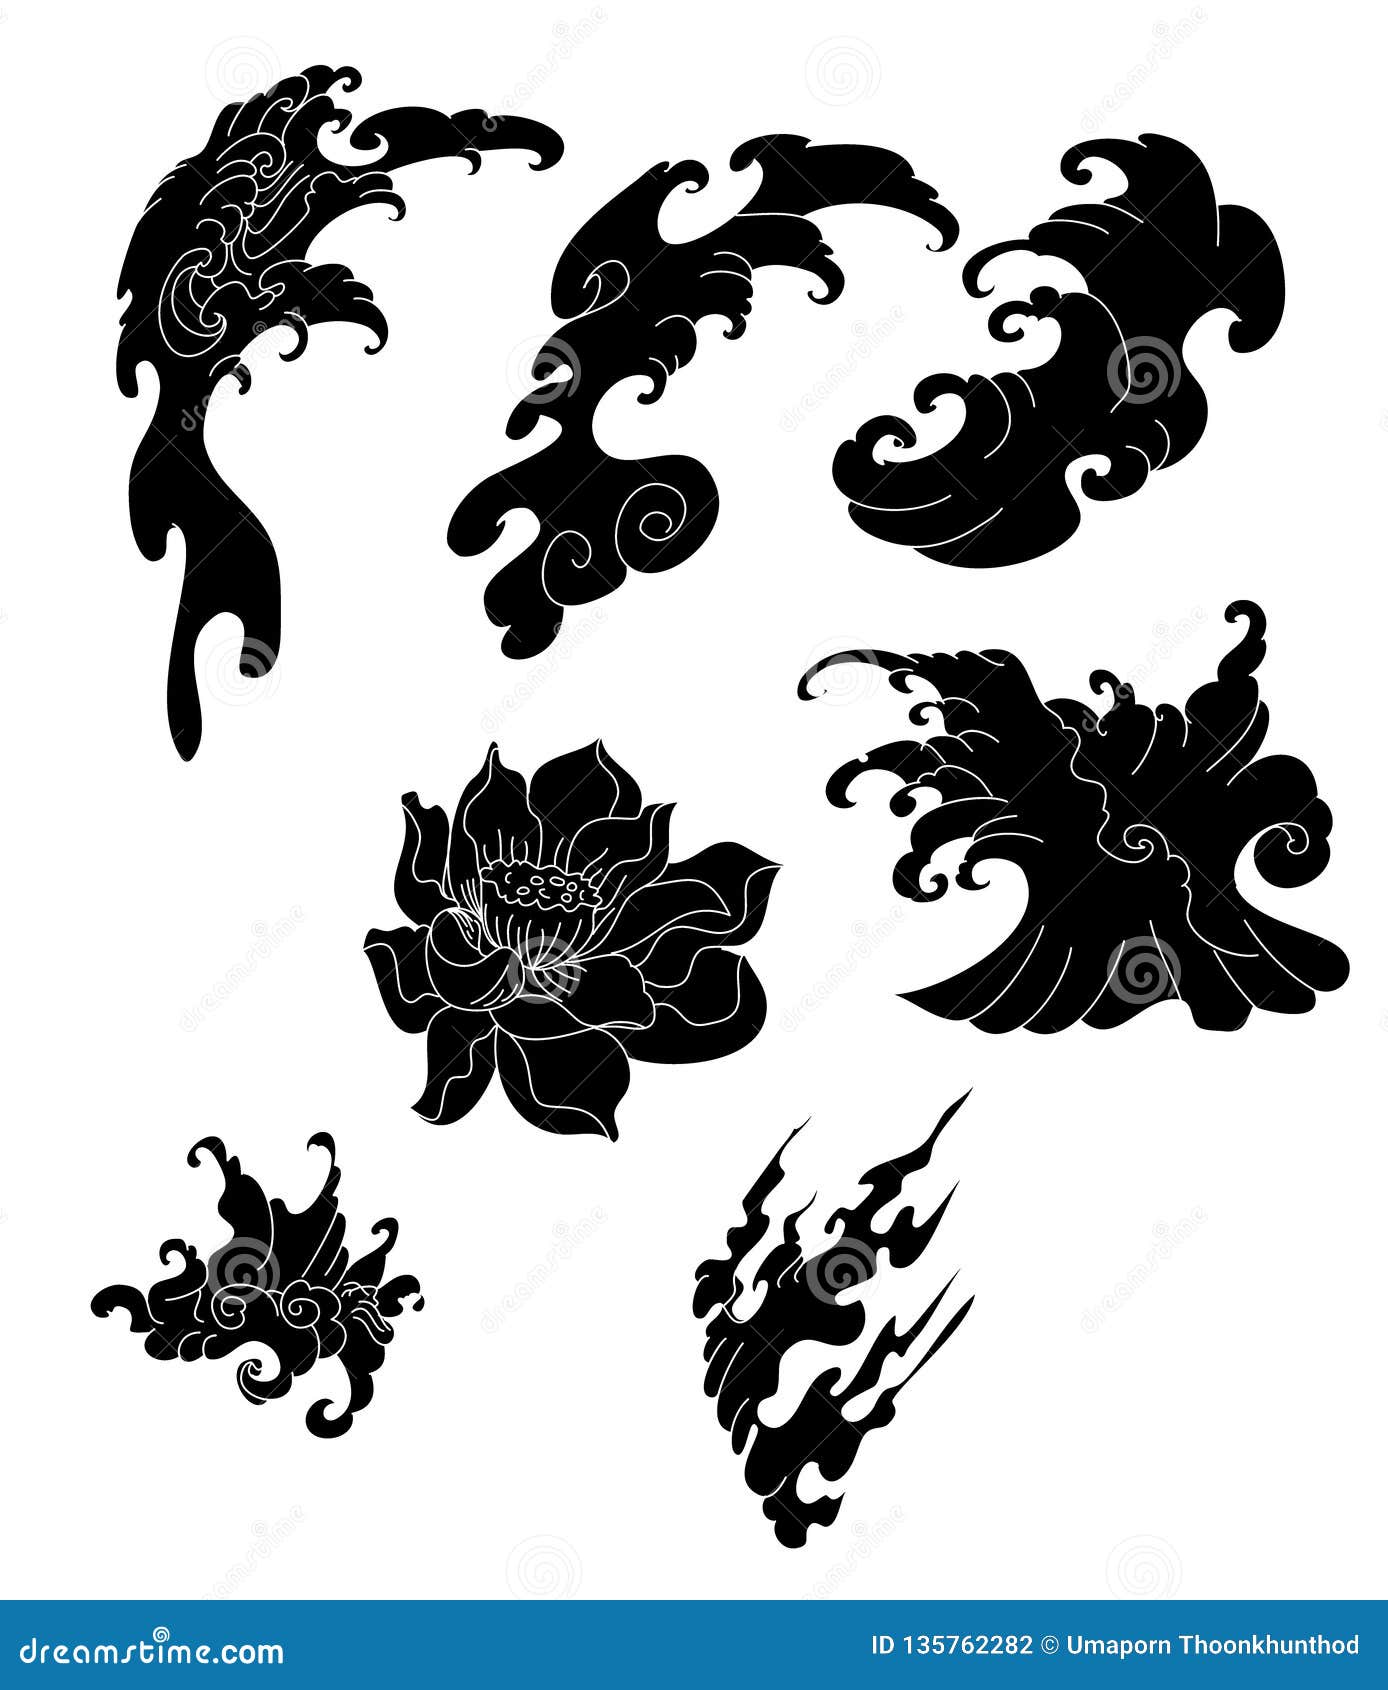 101 Amazing Japanese Cloud Tattoo Ideas That Will Blow Your Mind  Cloud  tattoo design Japanese cloud tattoo Cloud tattoo